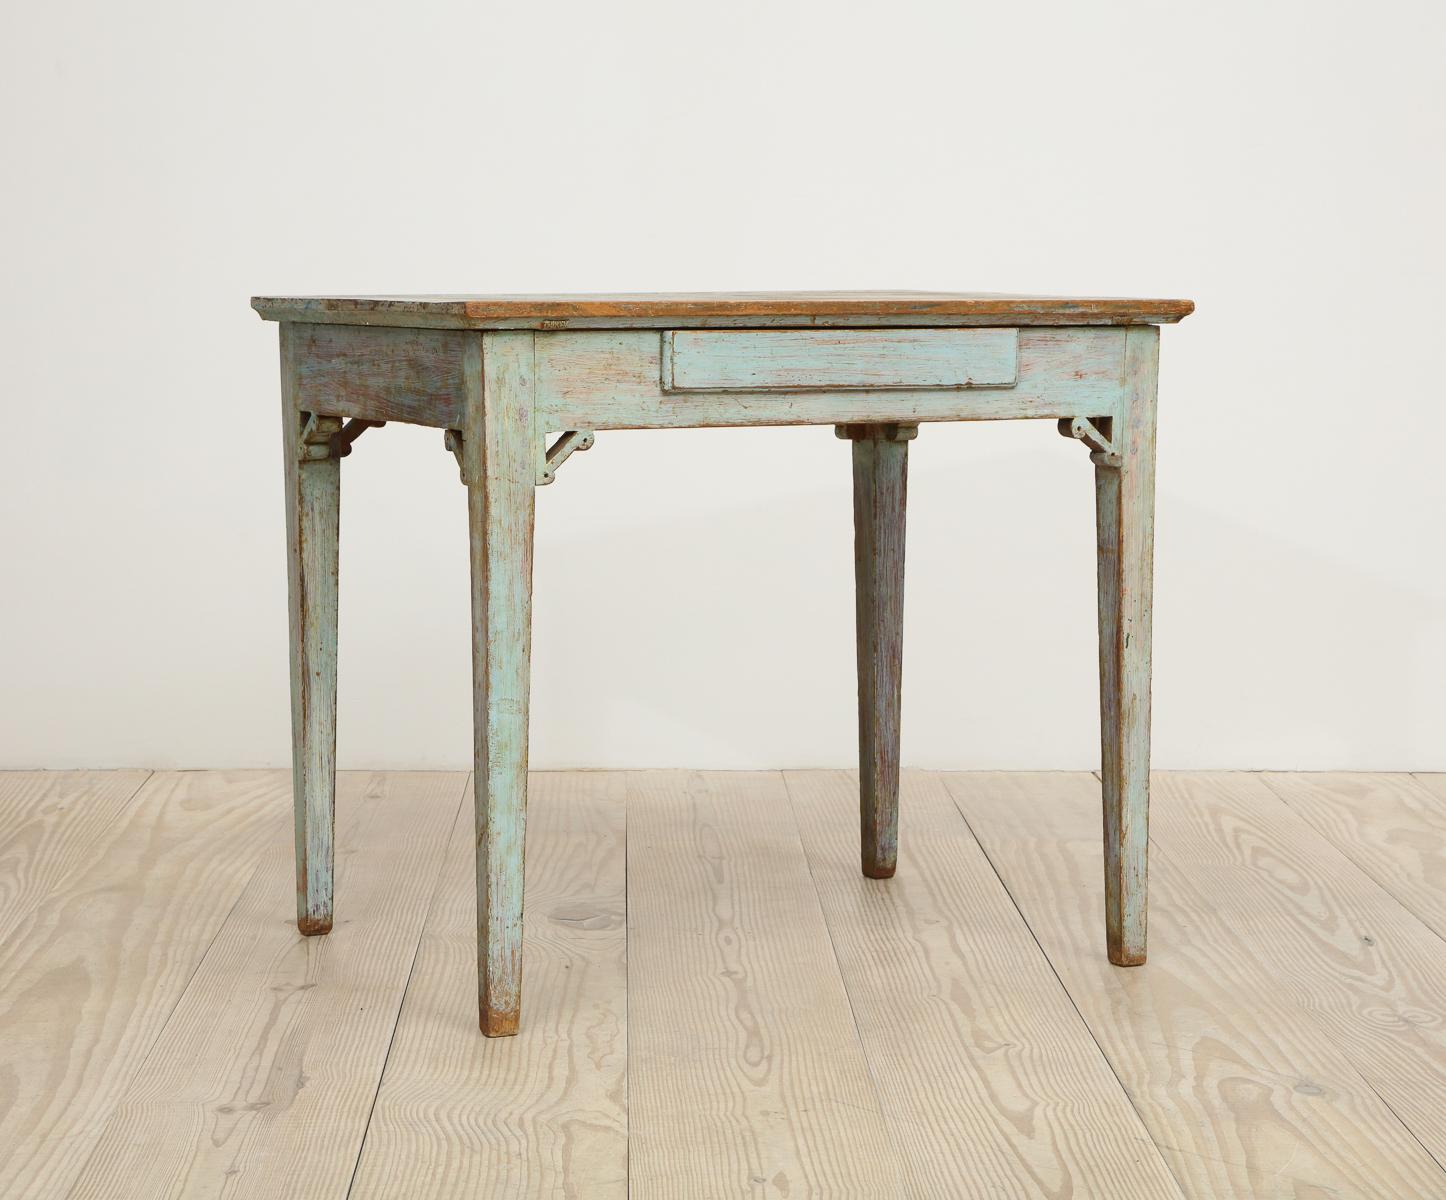 Gustavian 18th Century Table with Faux Marble-Top Center Drawer, Origin: Sweden 1